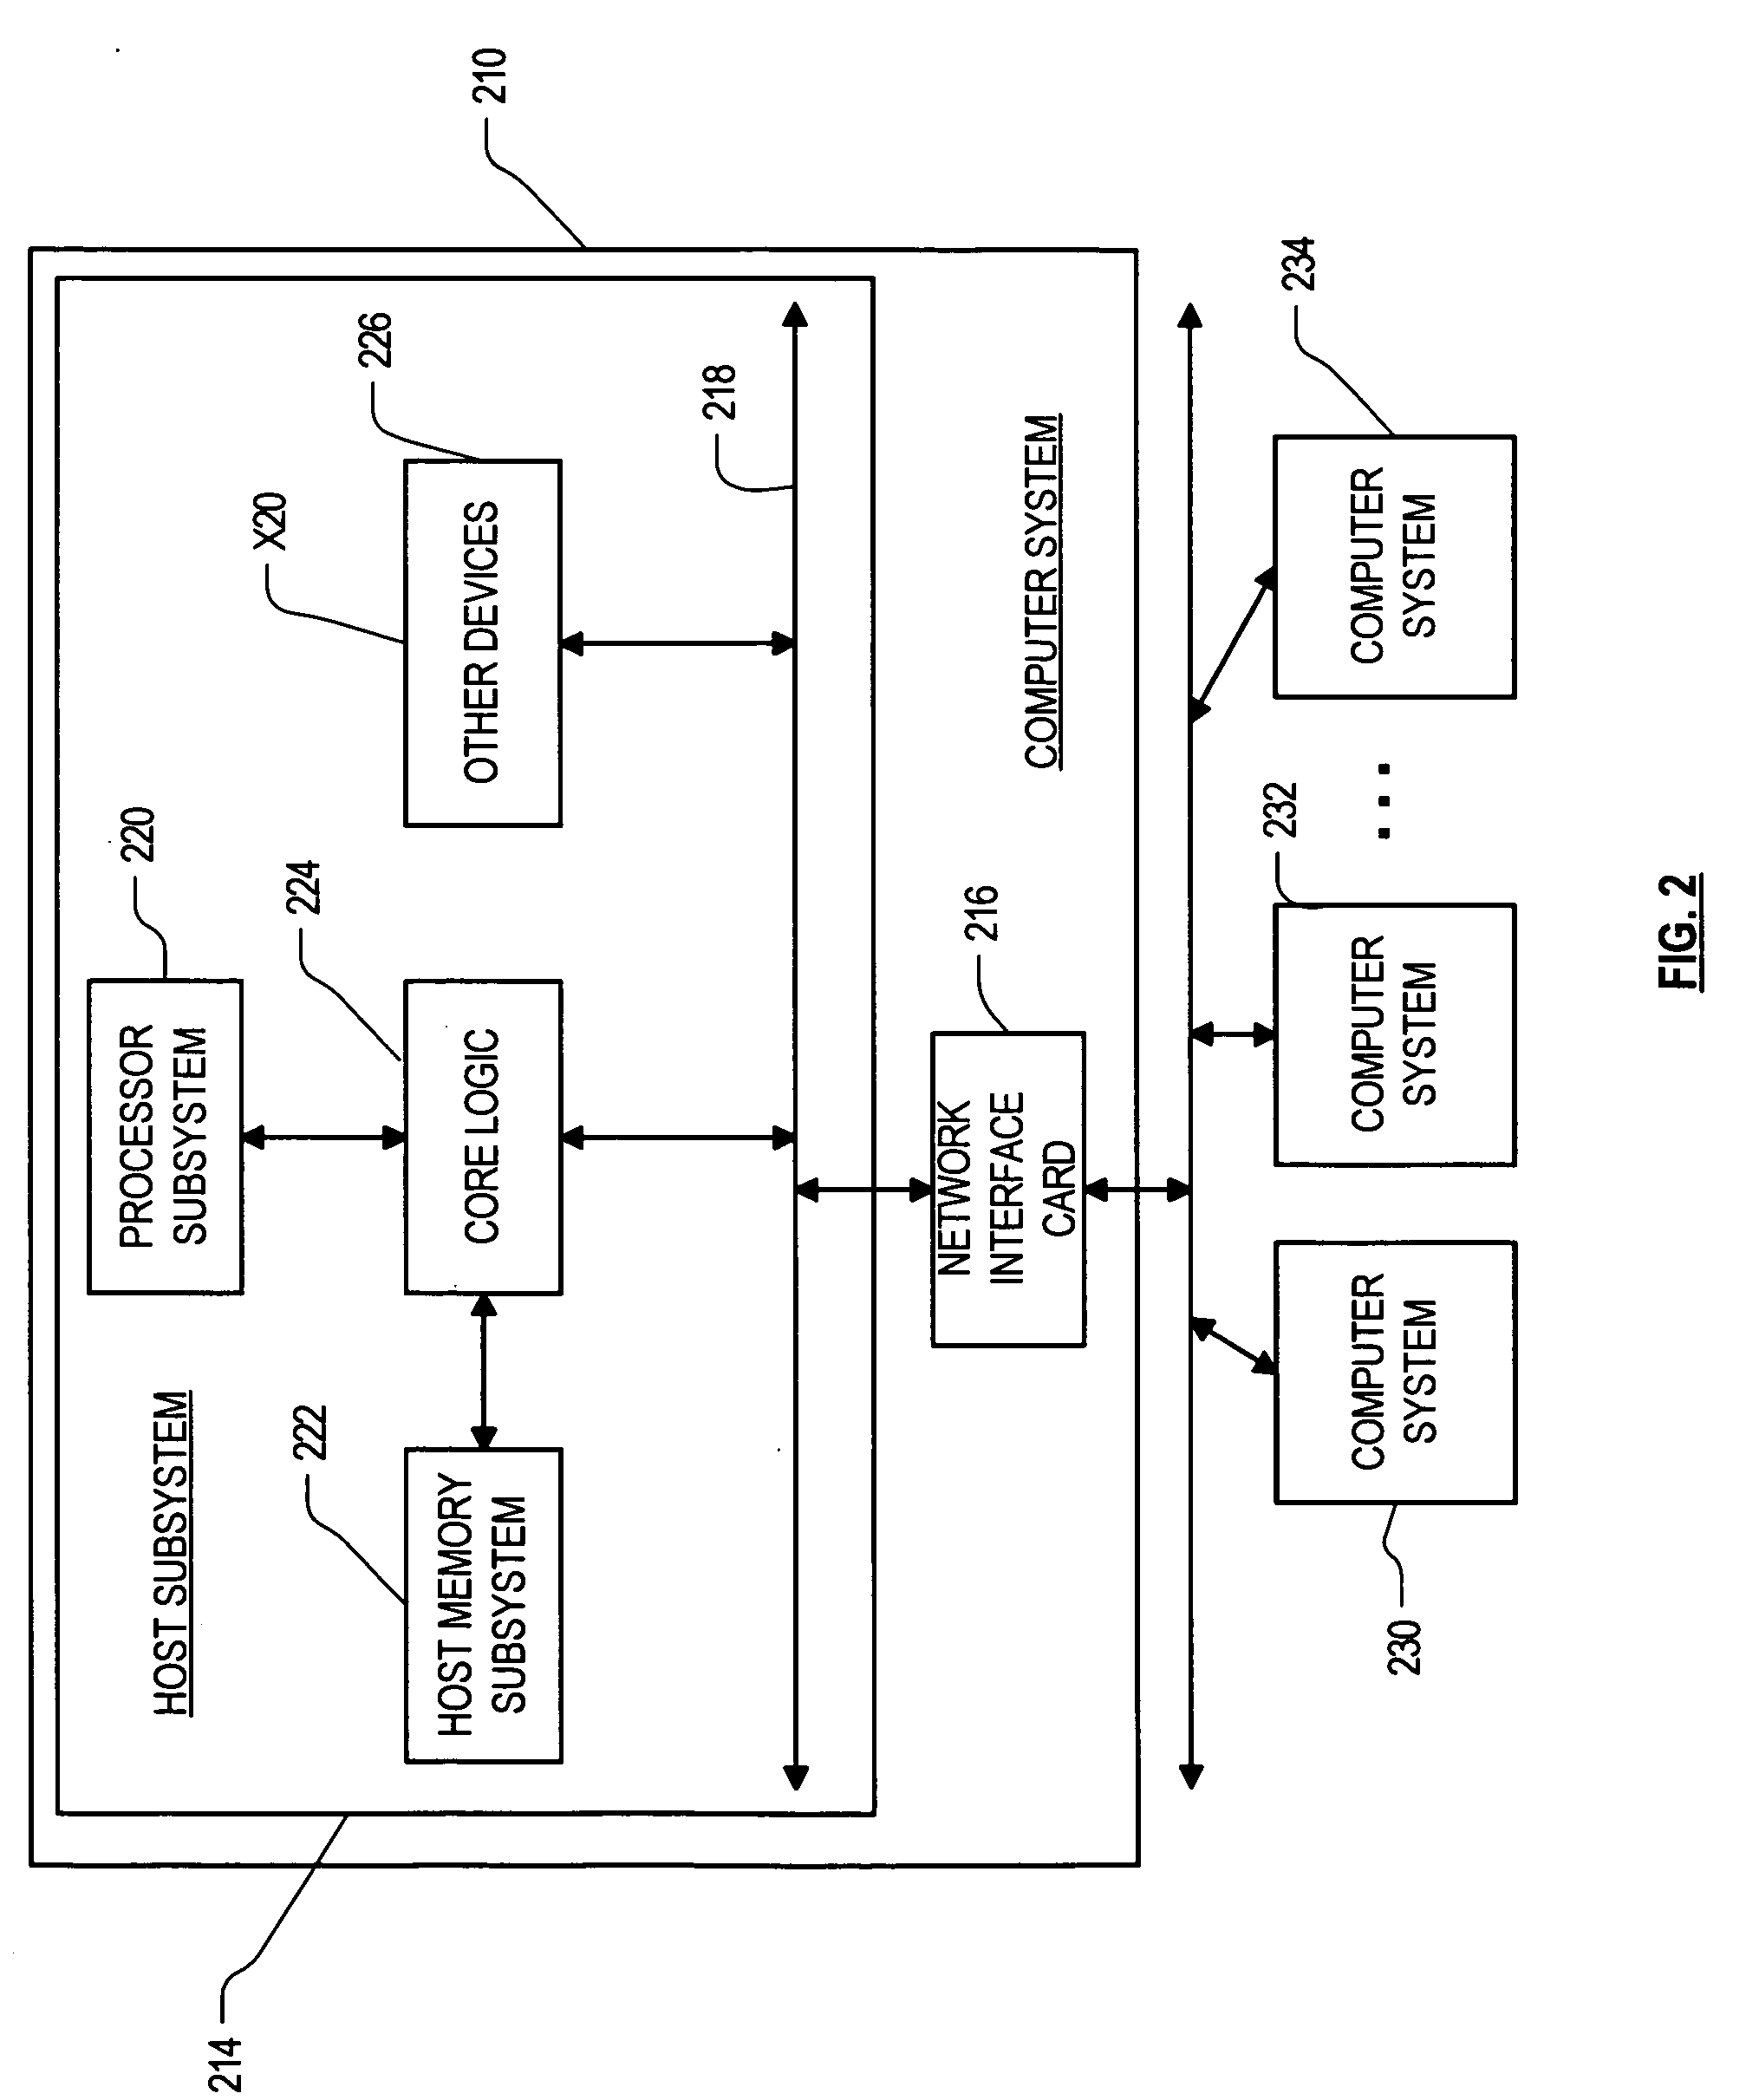 Queue depth management for communication between host and peripheral device